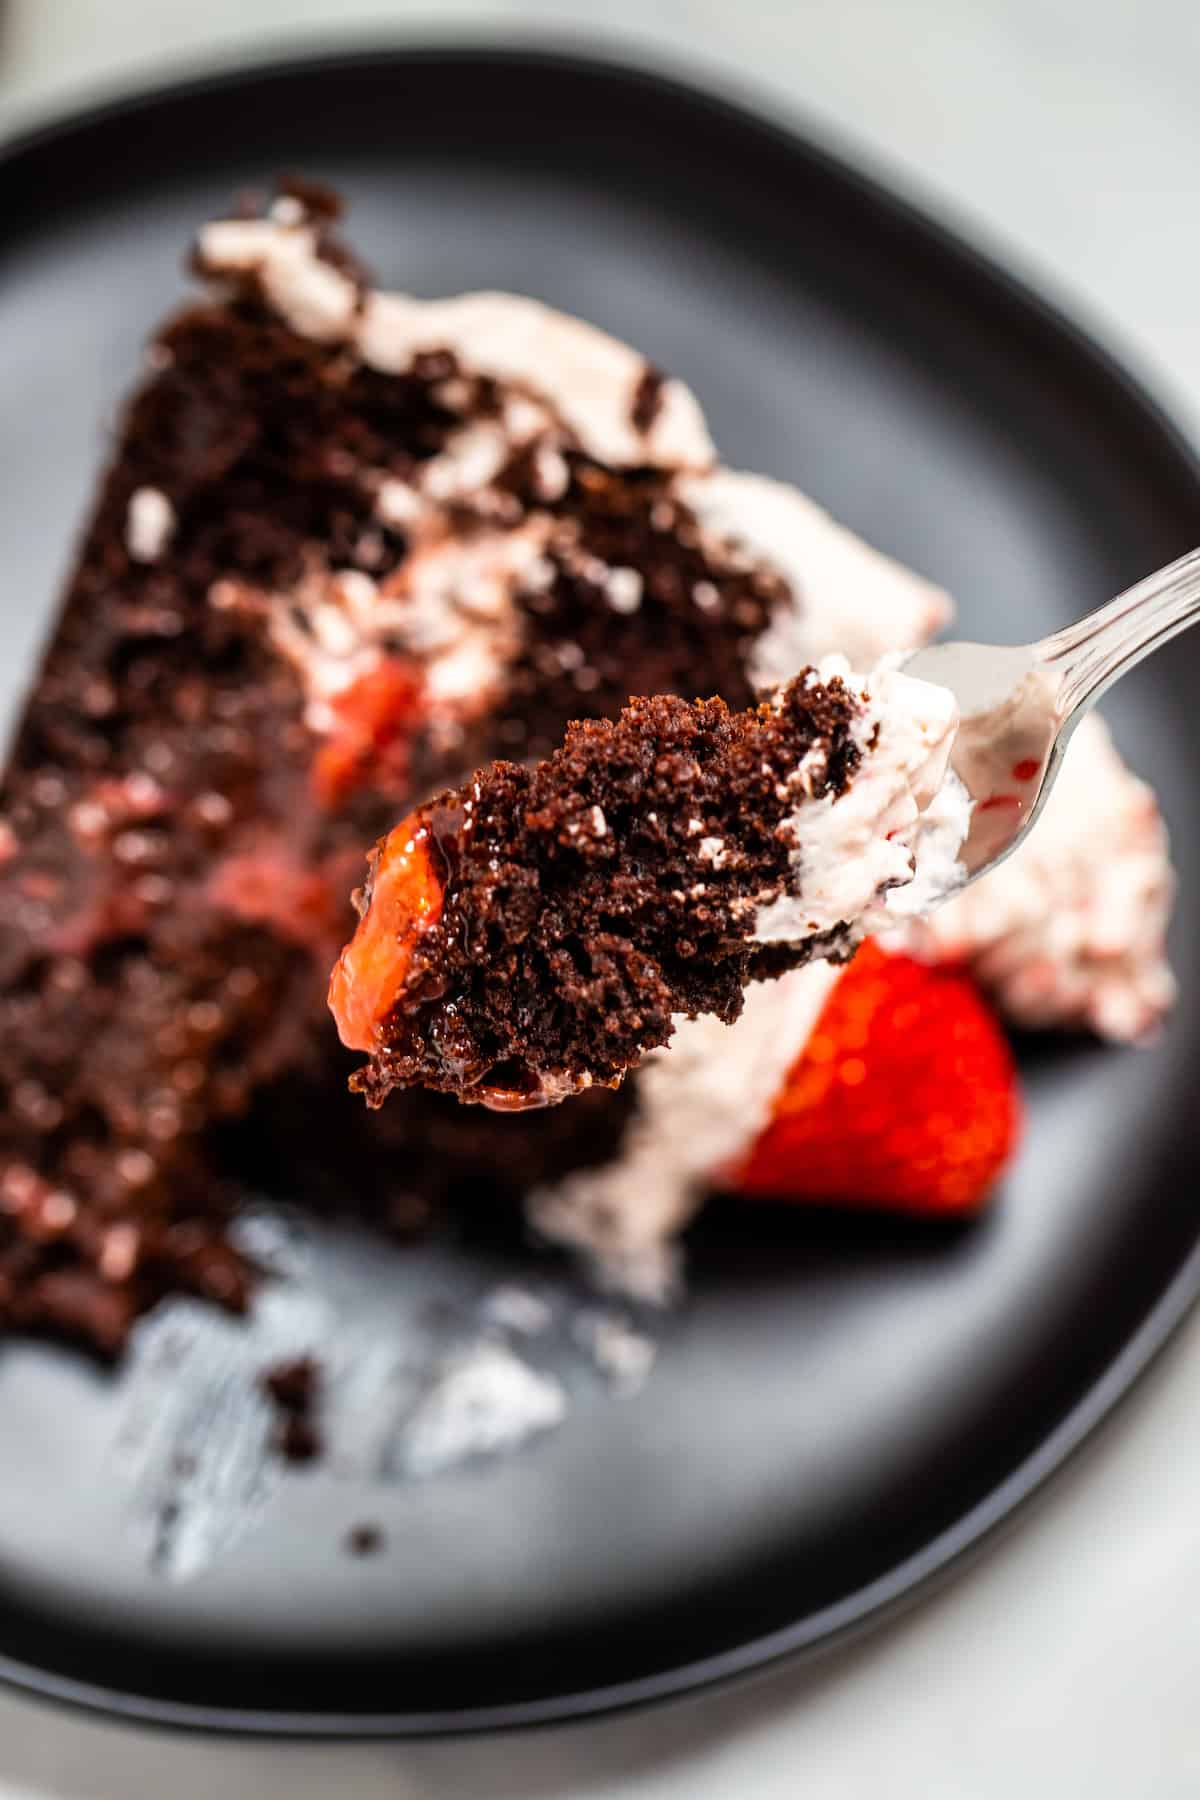 A fork full of chocolate cake with strawberry filling over a plate with a slice of cake.